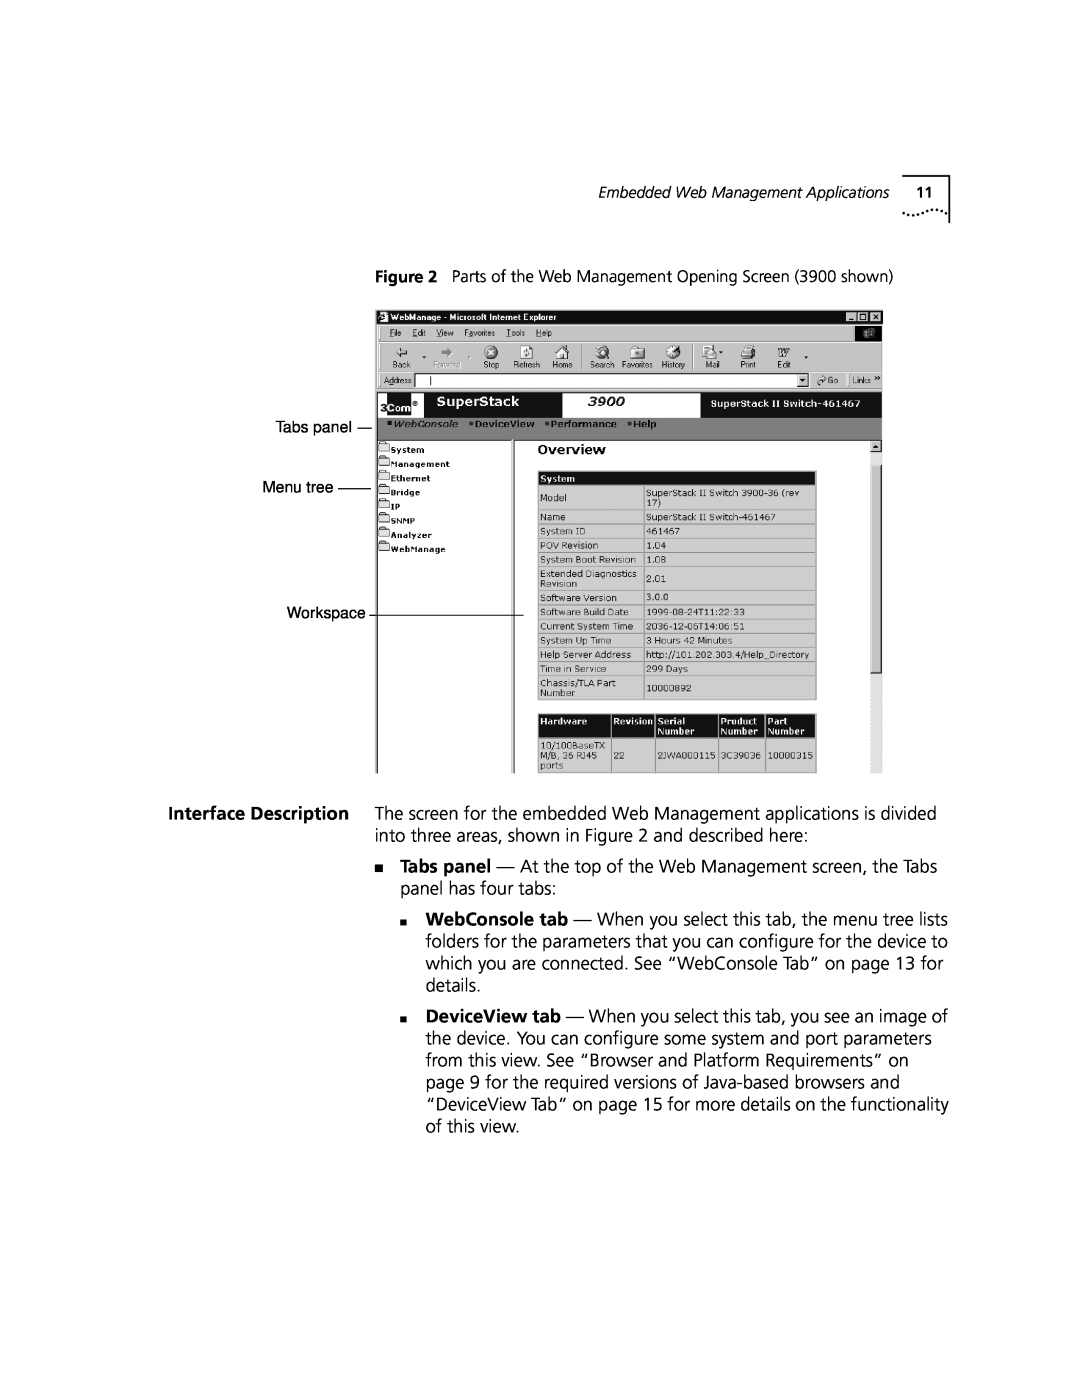 3Com manual Embedded Web Management Applications, Parts of the Web Management Opening Screen 3900 shown 